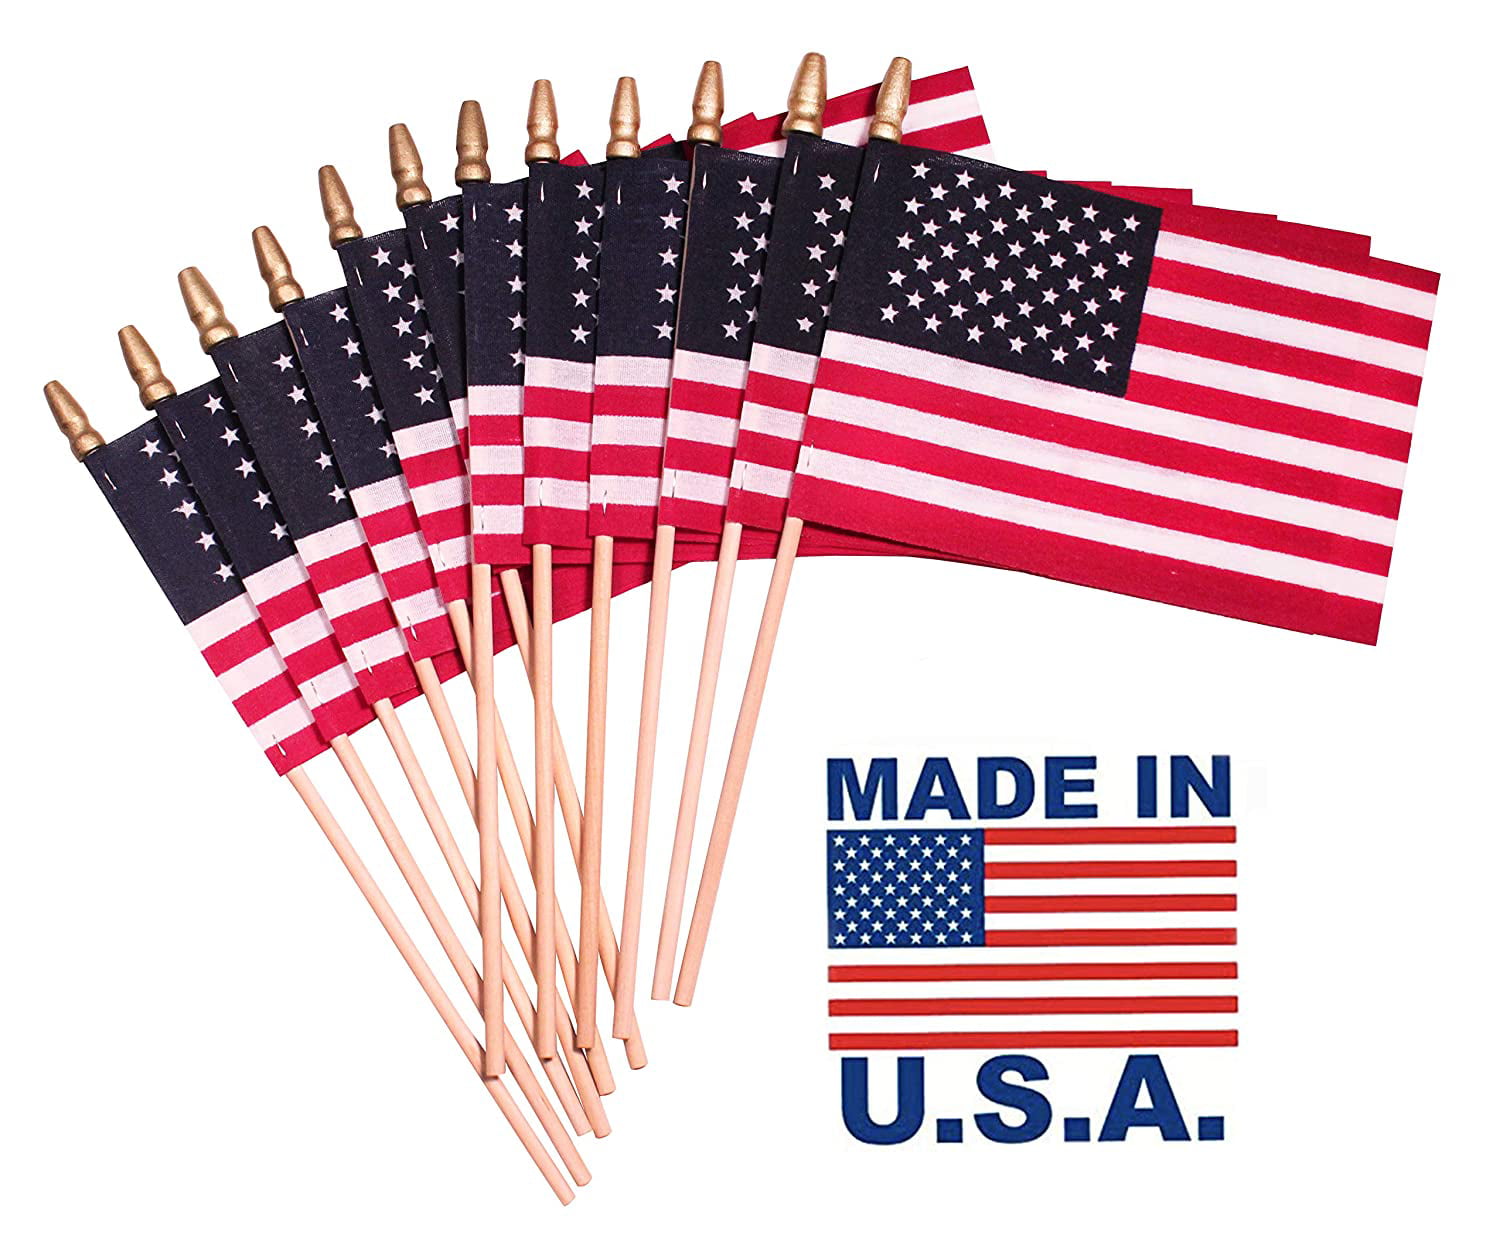 Small US Flags Mini American Flag on Stick 5" x 8" In 50Pcs Small American Flags